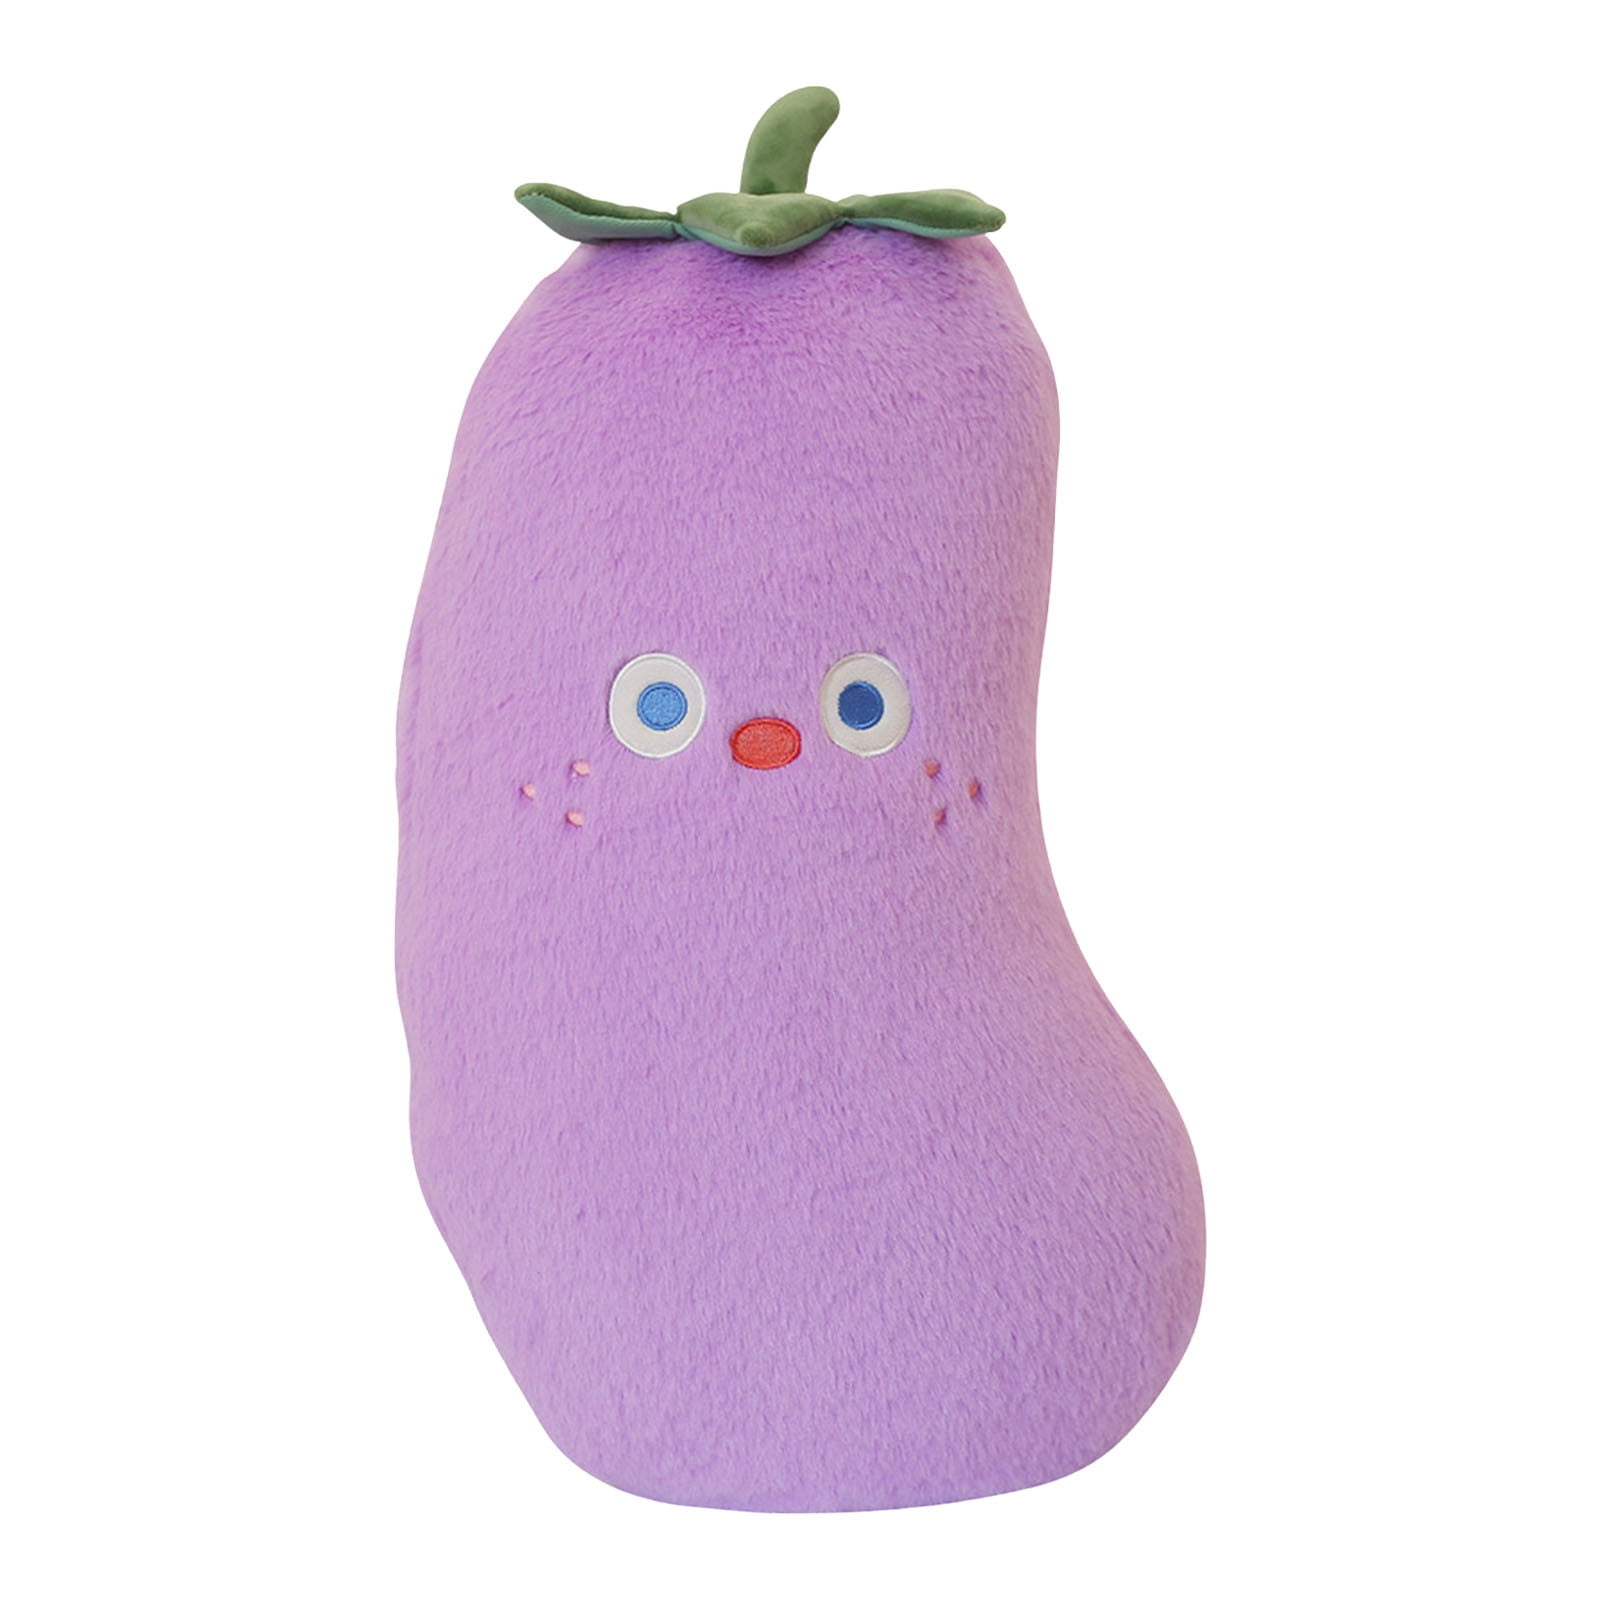 Cute Vegetables Eggplant Stuffed Toy Baby Kids Girls Birthday Gift Soft Pillow 